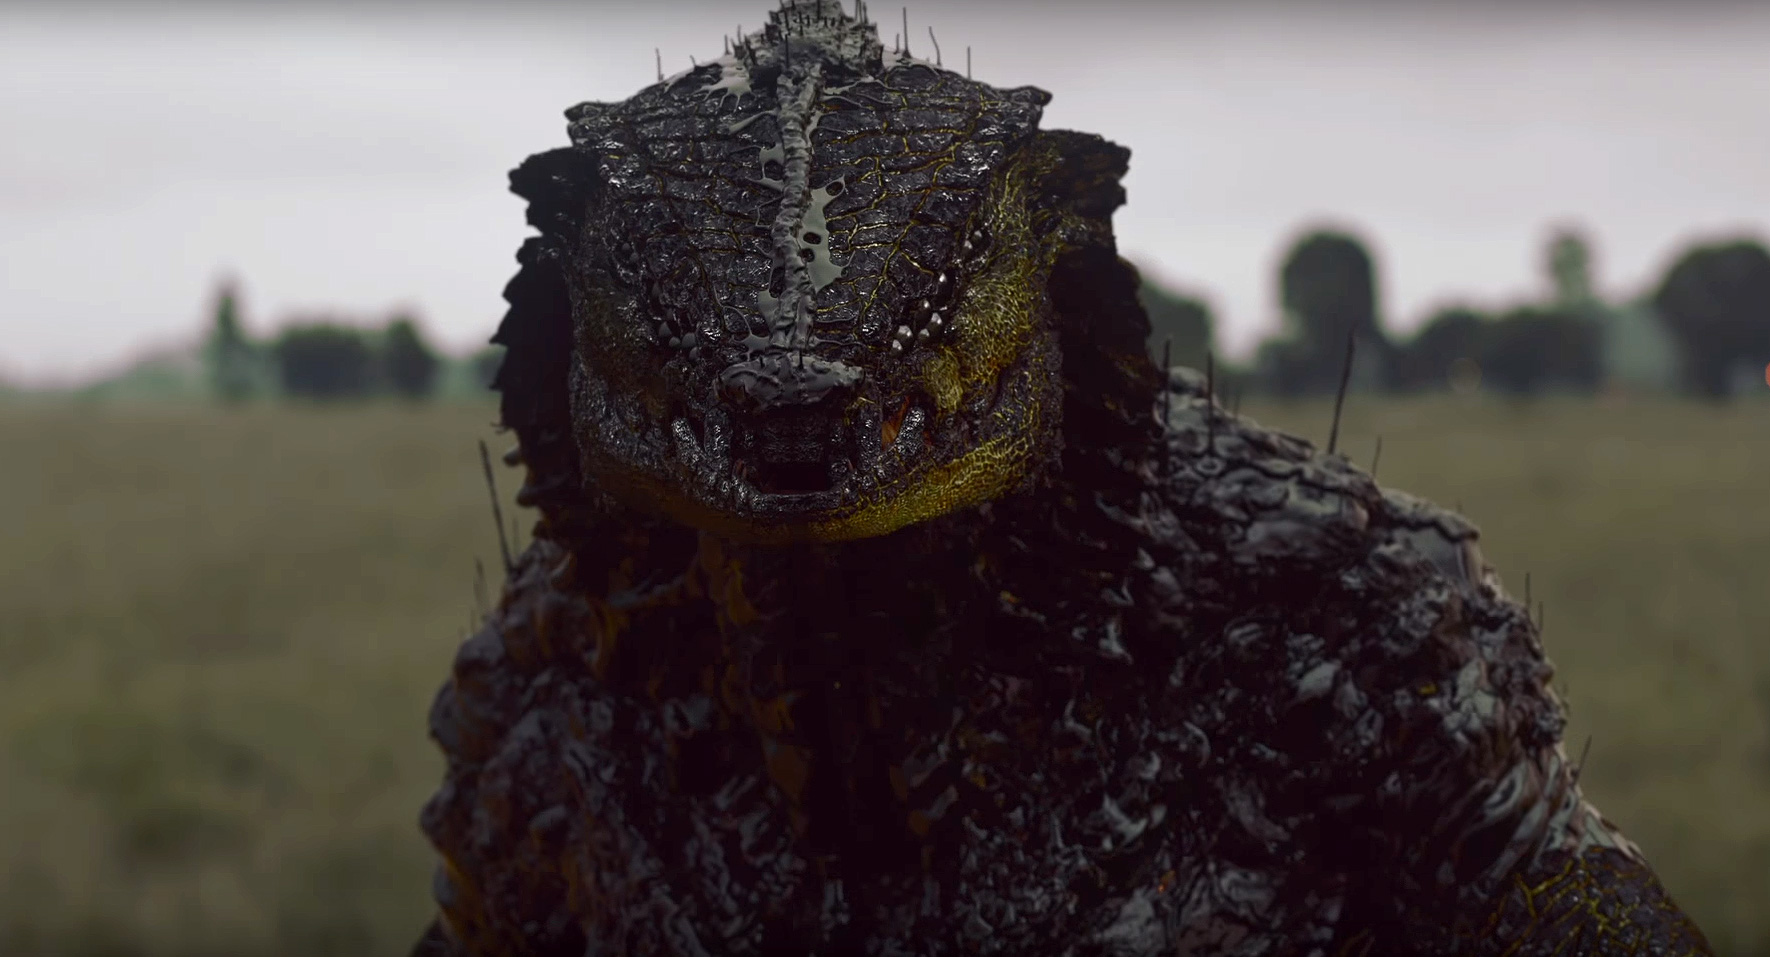 New films by Director Neil Blomkamp will appear in the service Steam